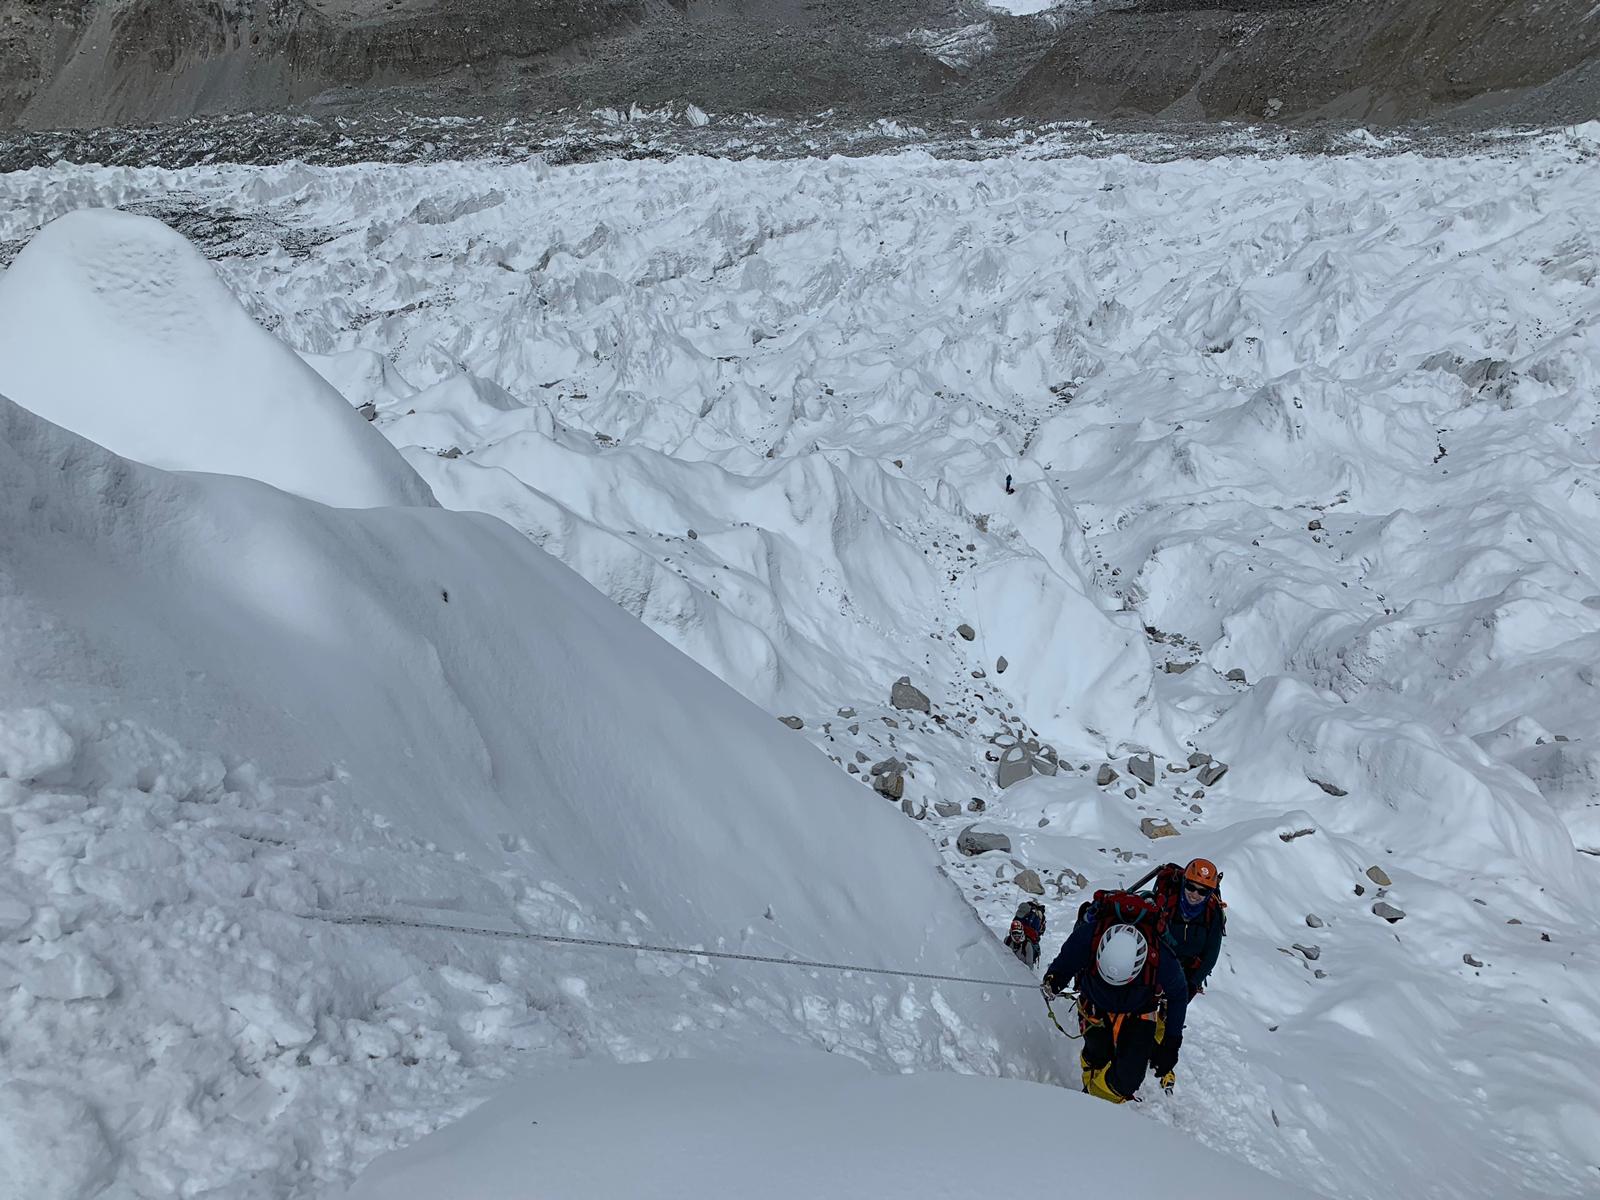 Climbing in the icefall today